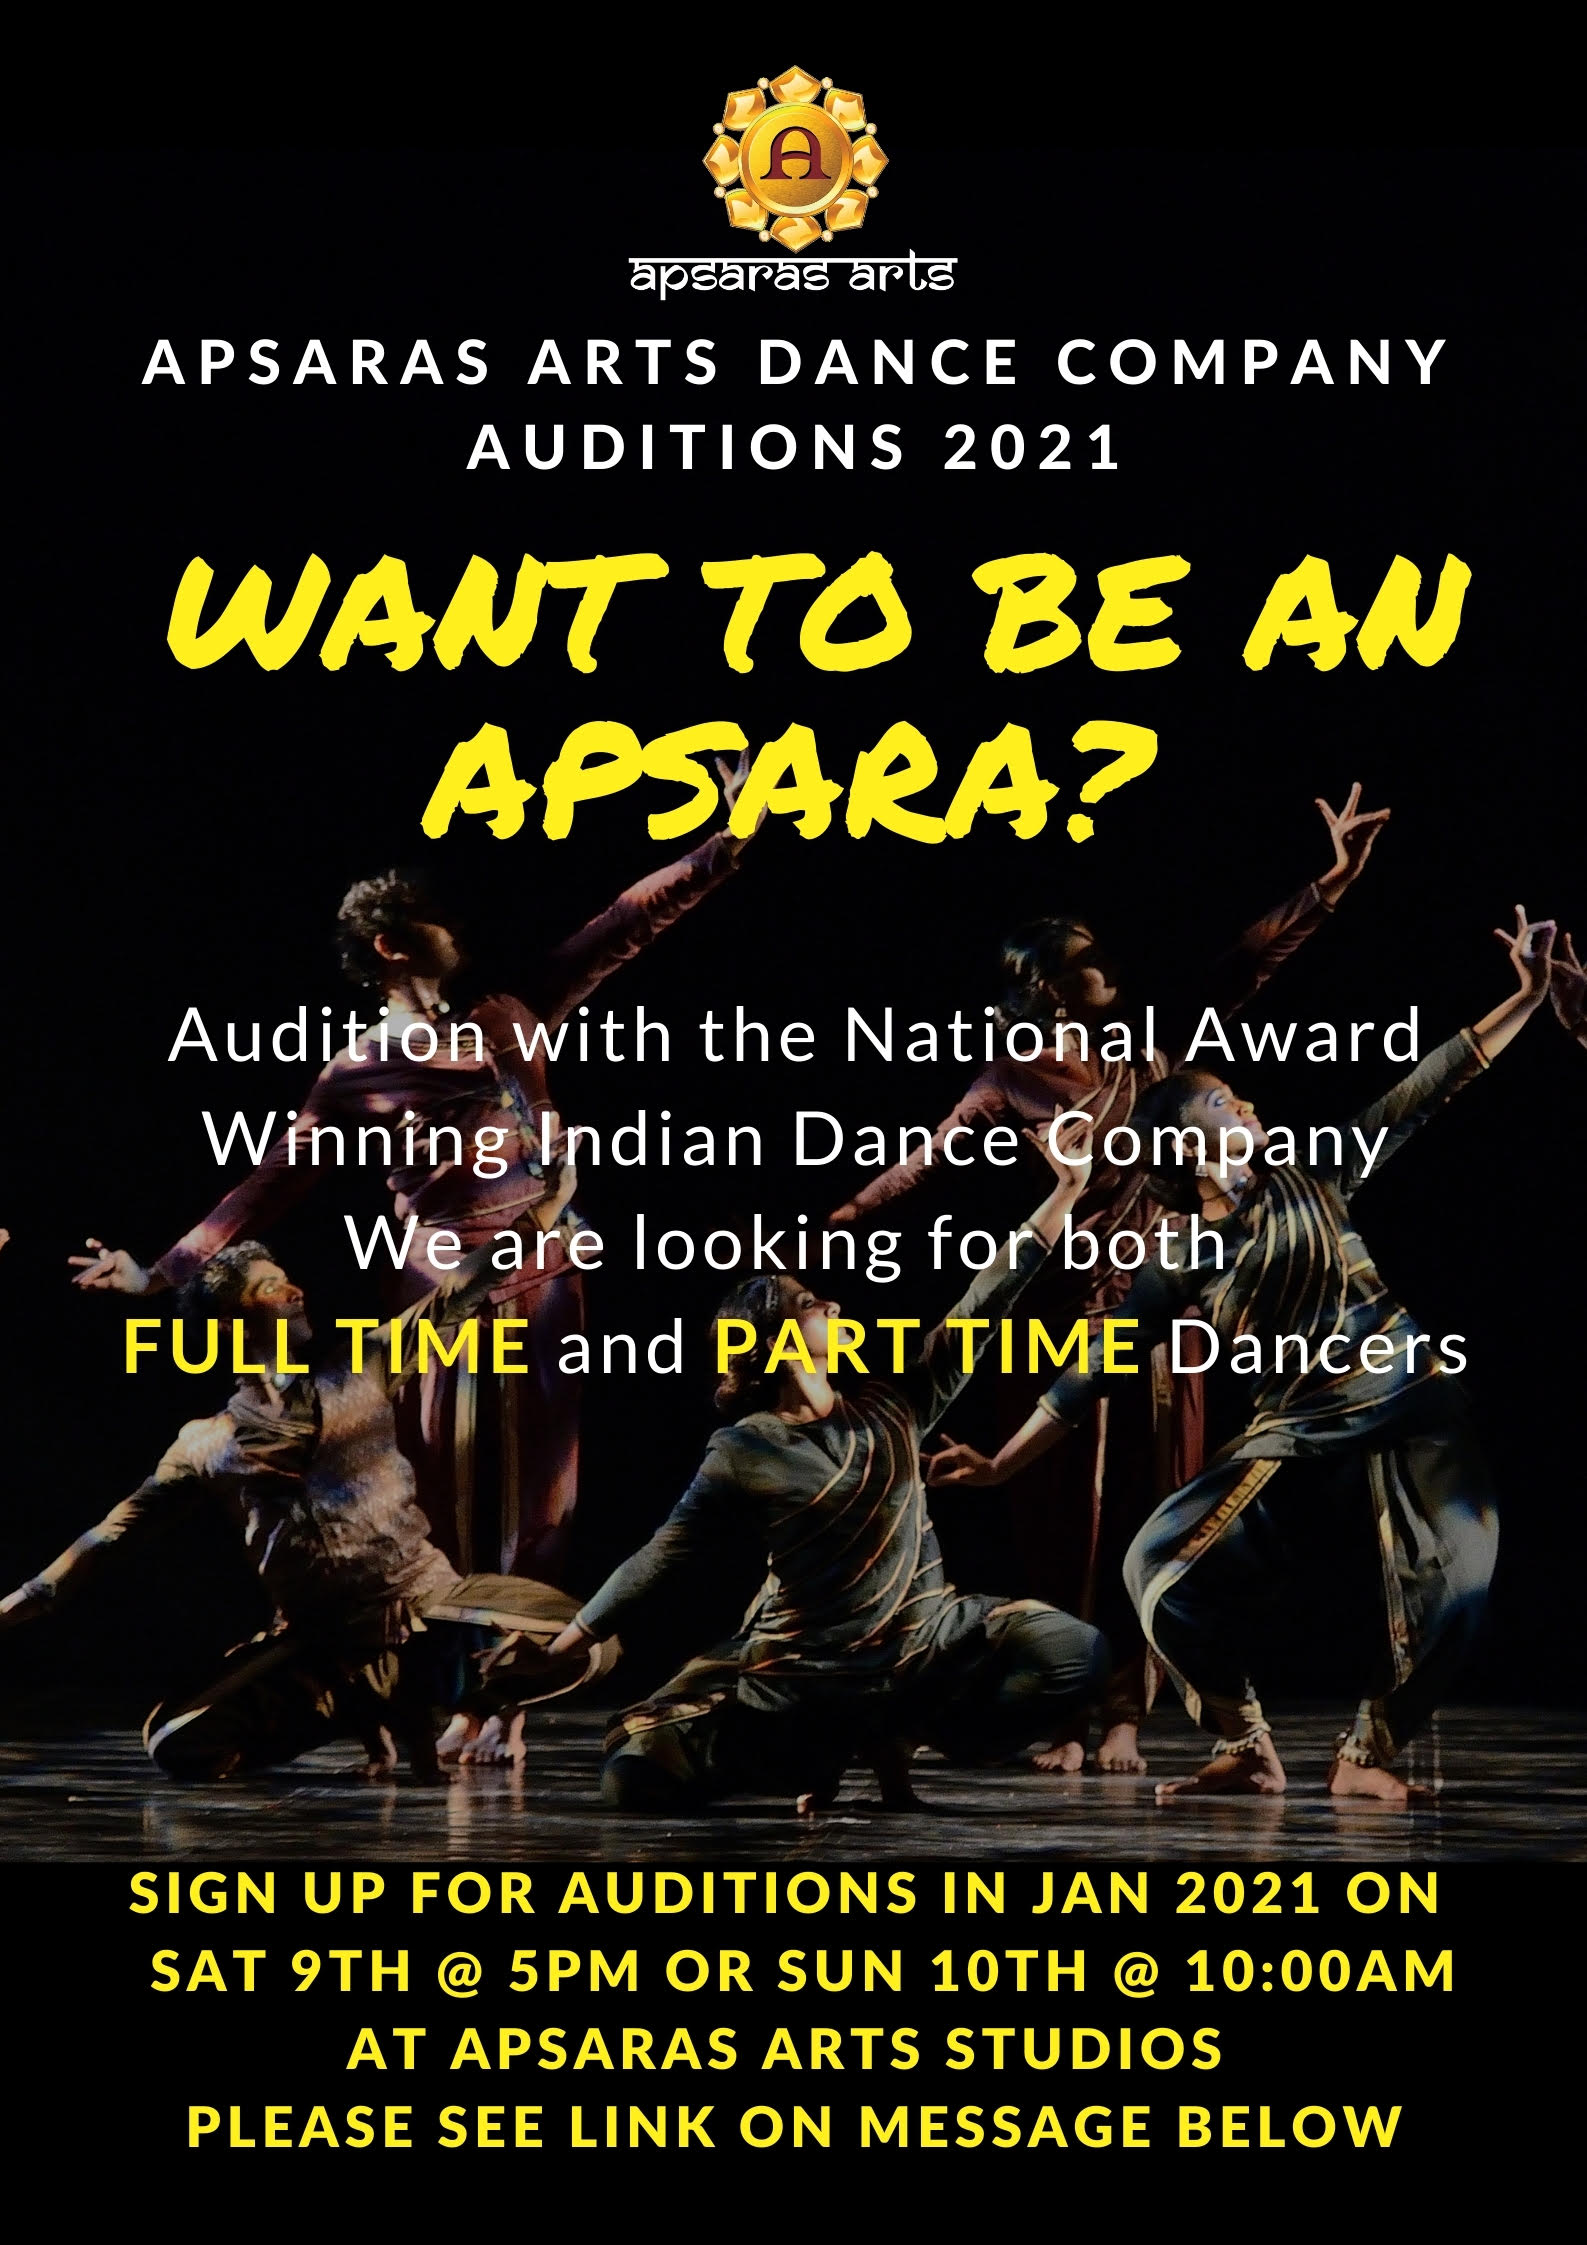 AUDITIONS - January 2021
Apsaras Arts Dance Company Calls for Auditions